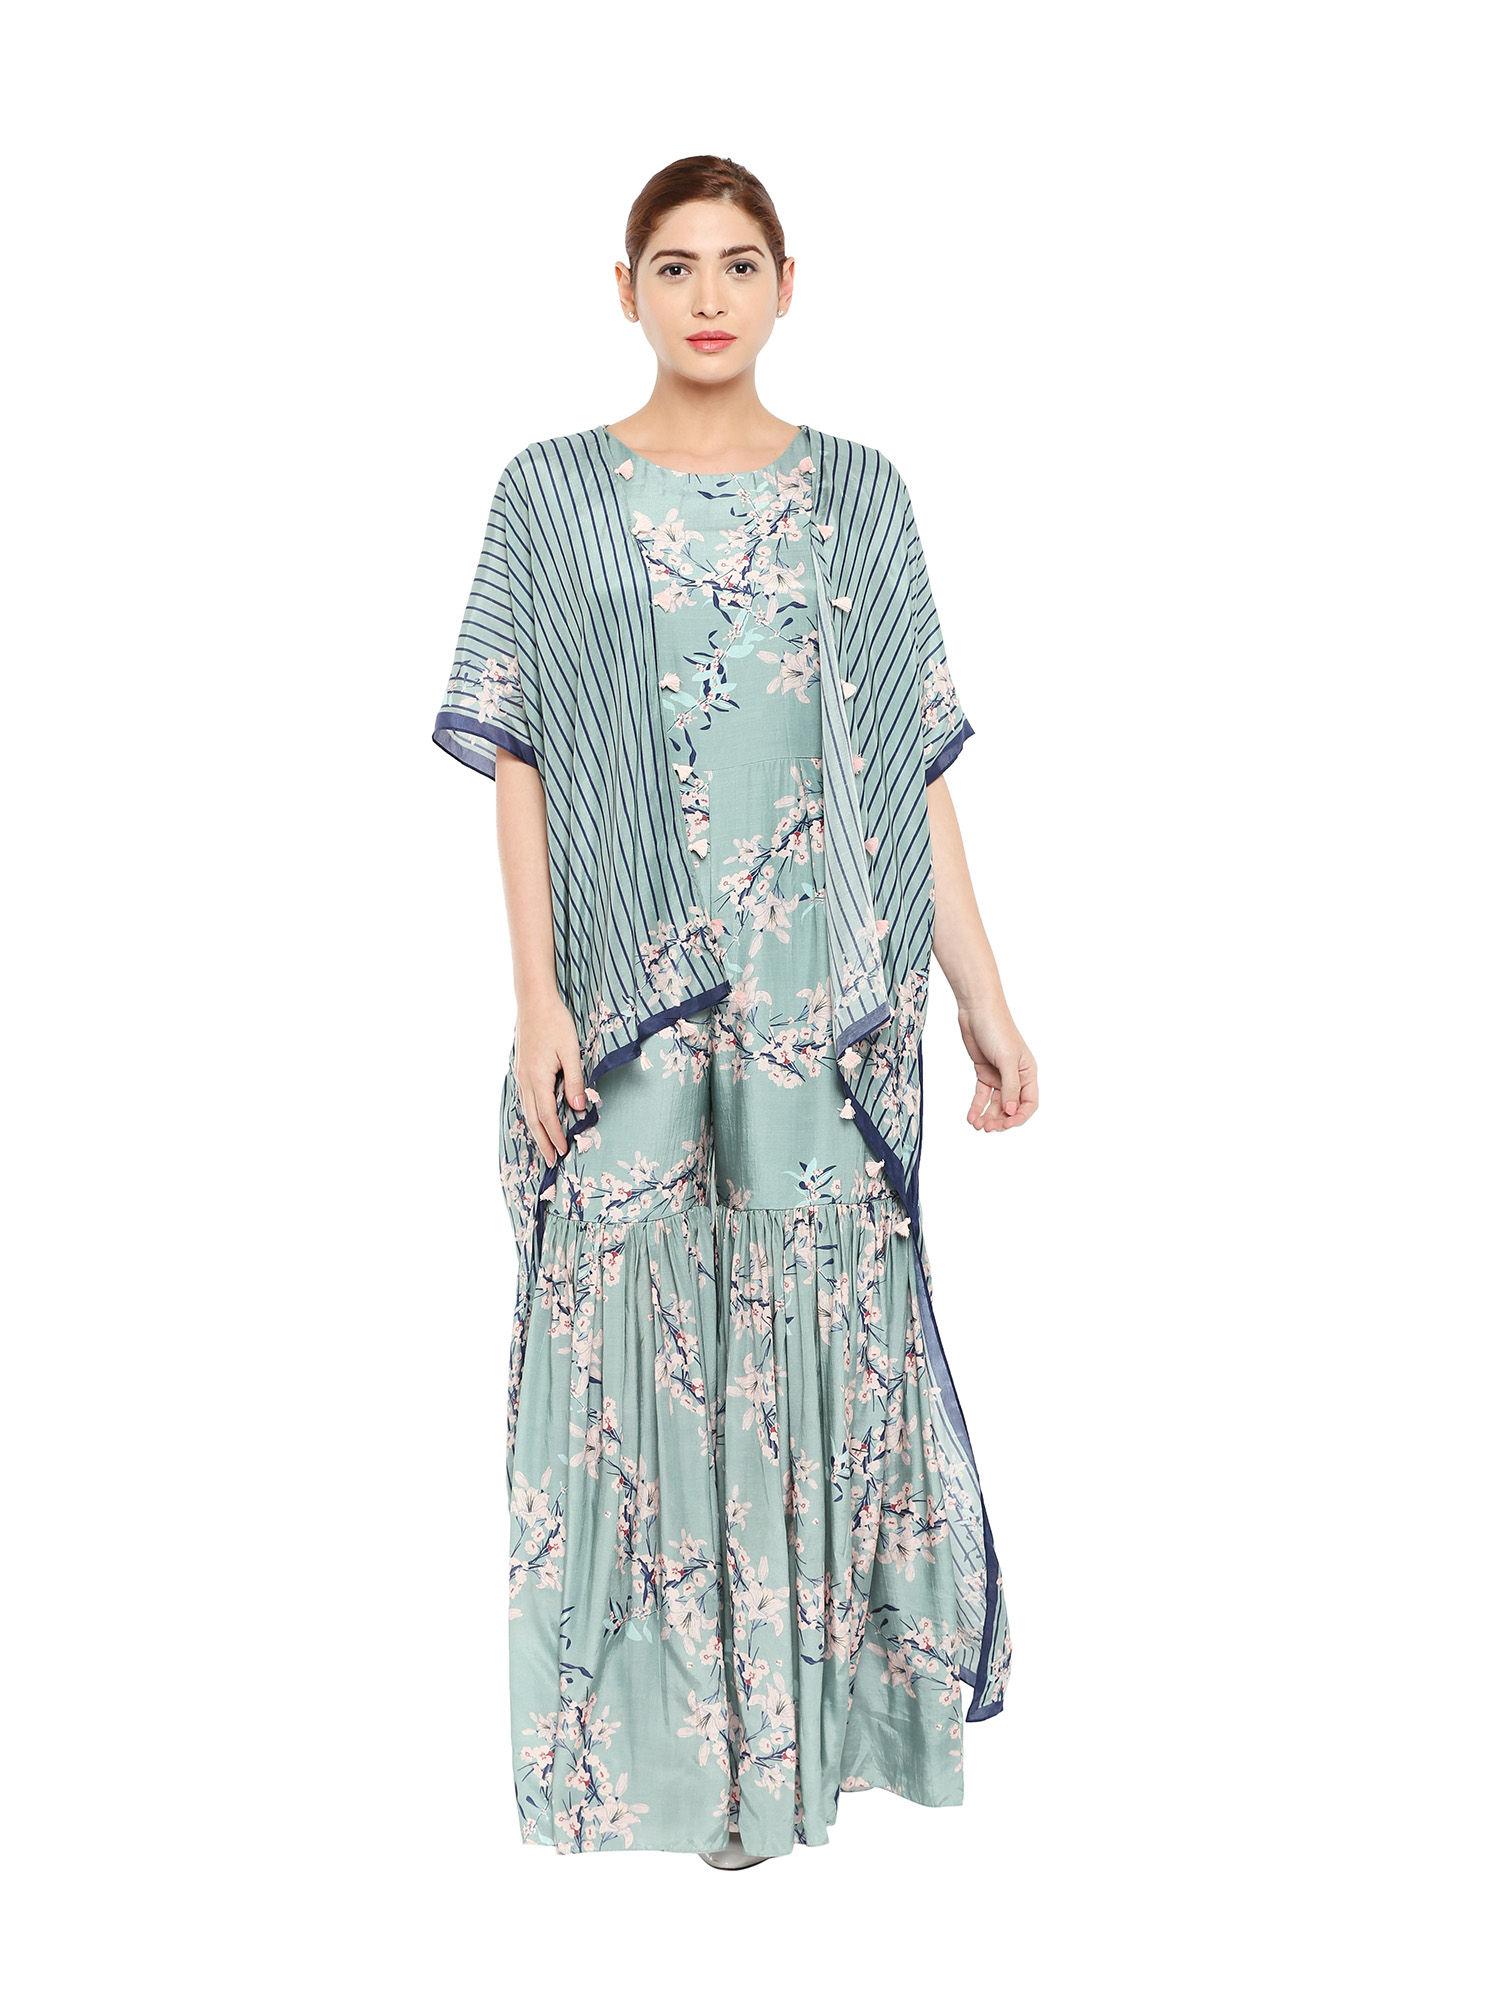 floral sharara style jumpsuit and printed cape jacket - customisable